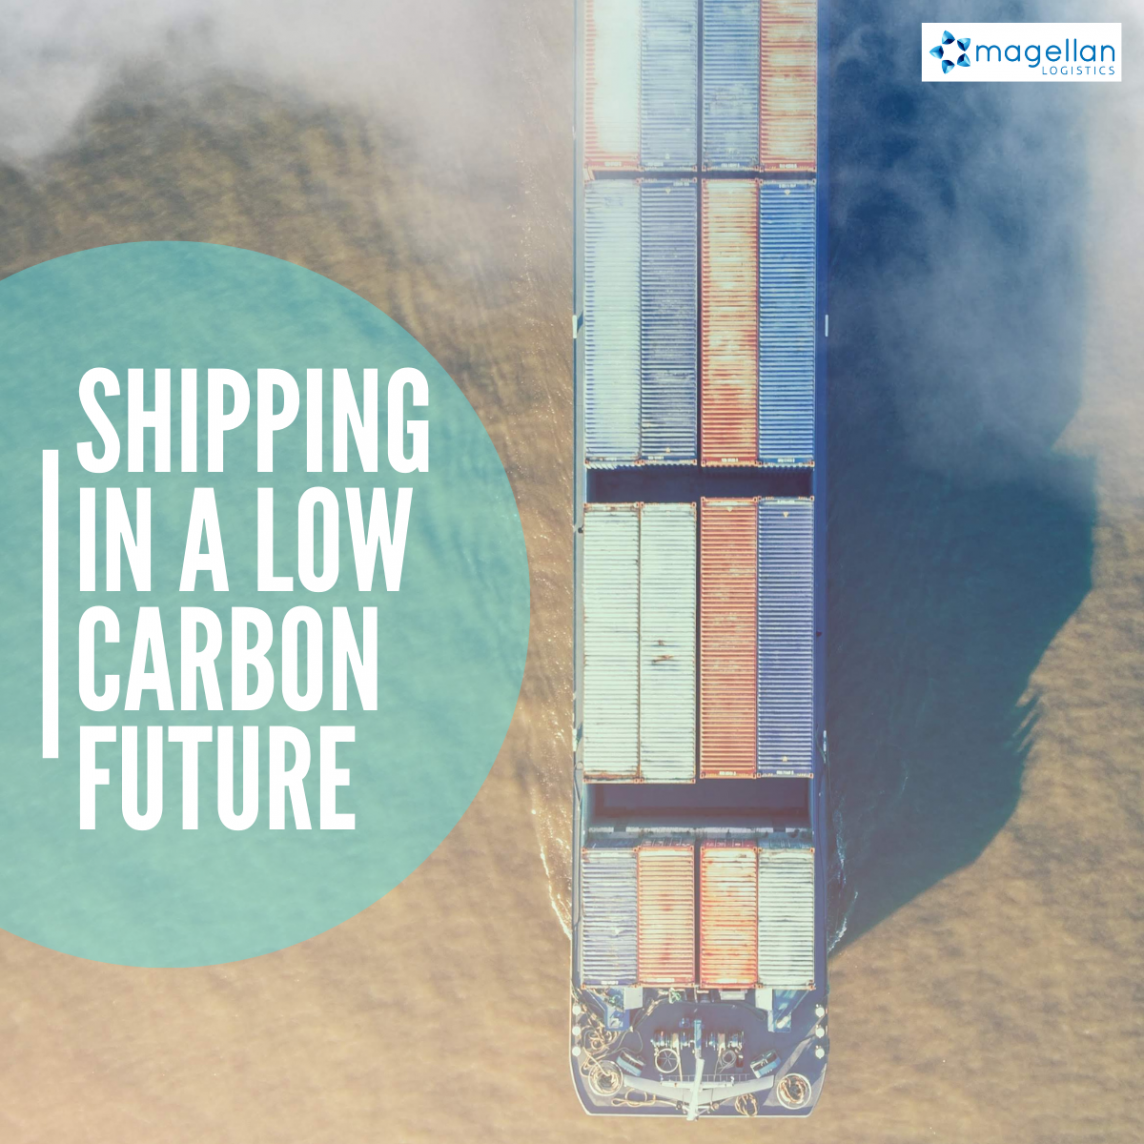 The future of low carbon shipping.